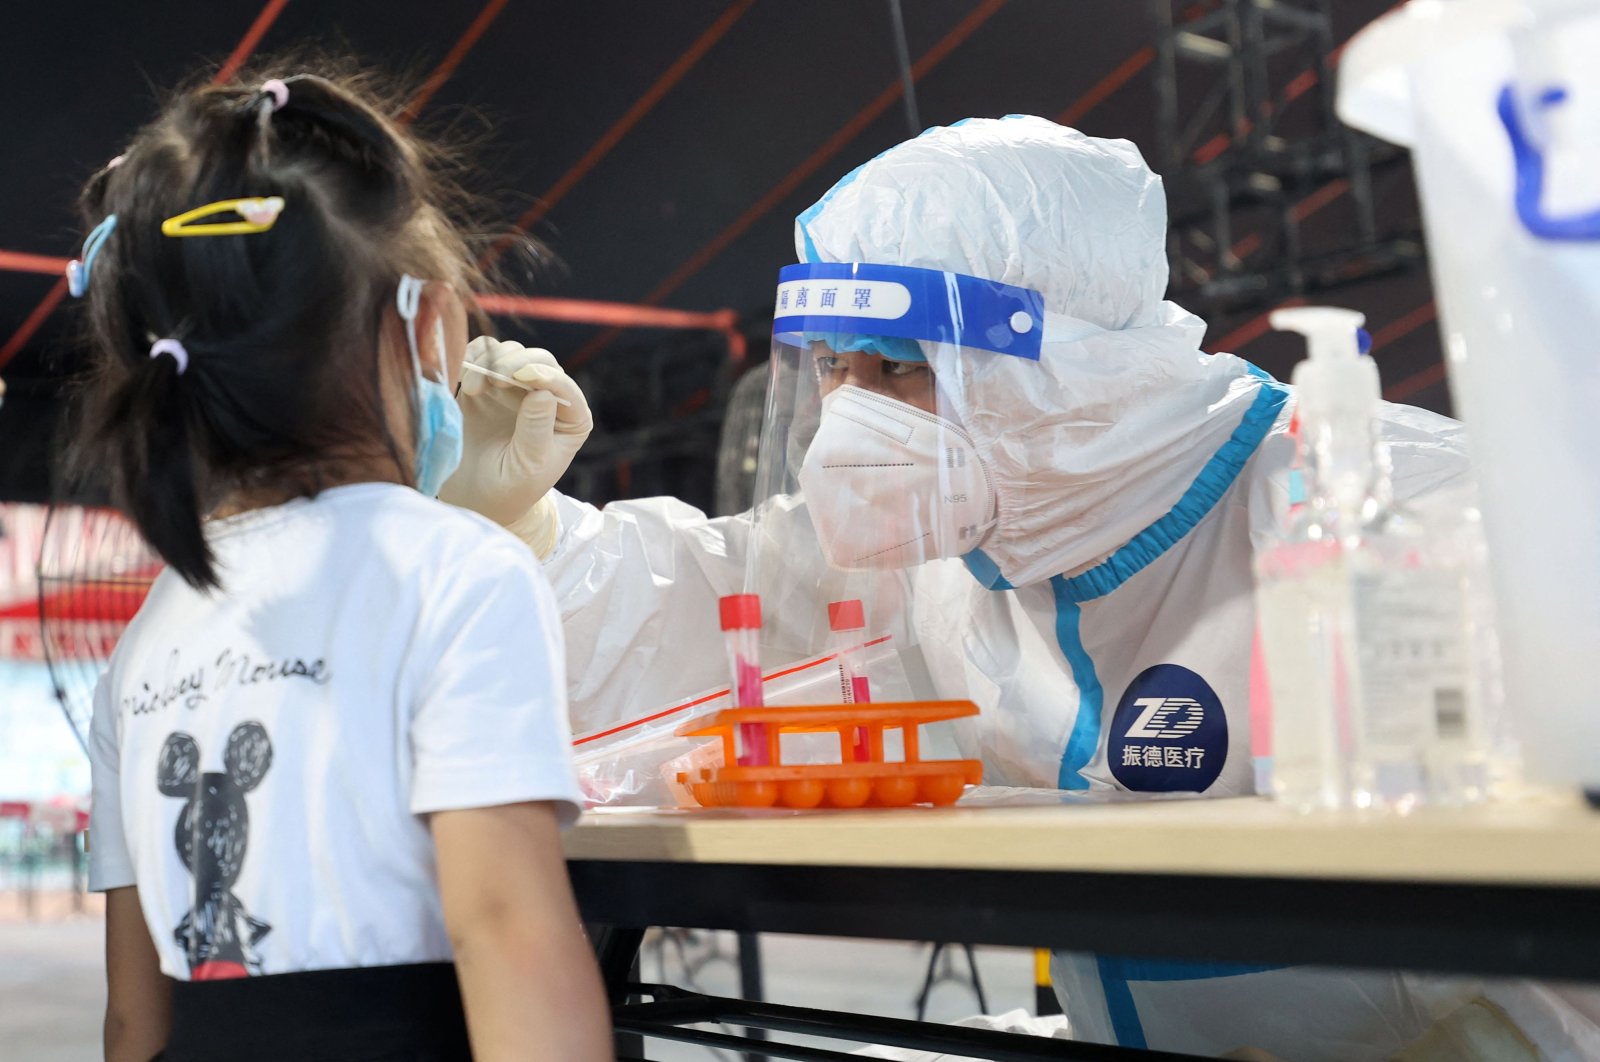 A health worker conducting a swab test on a child for the COVID-19 coronavirus in Xiamen, China, August 10, 2022. (AFP Photo)